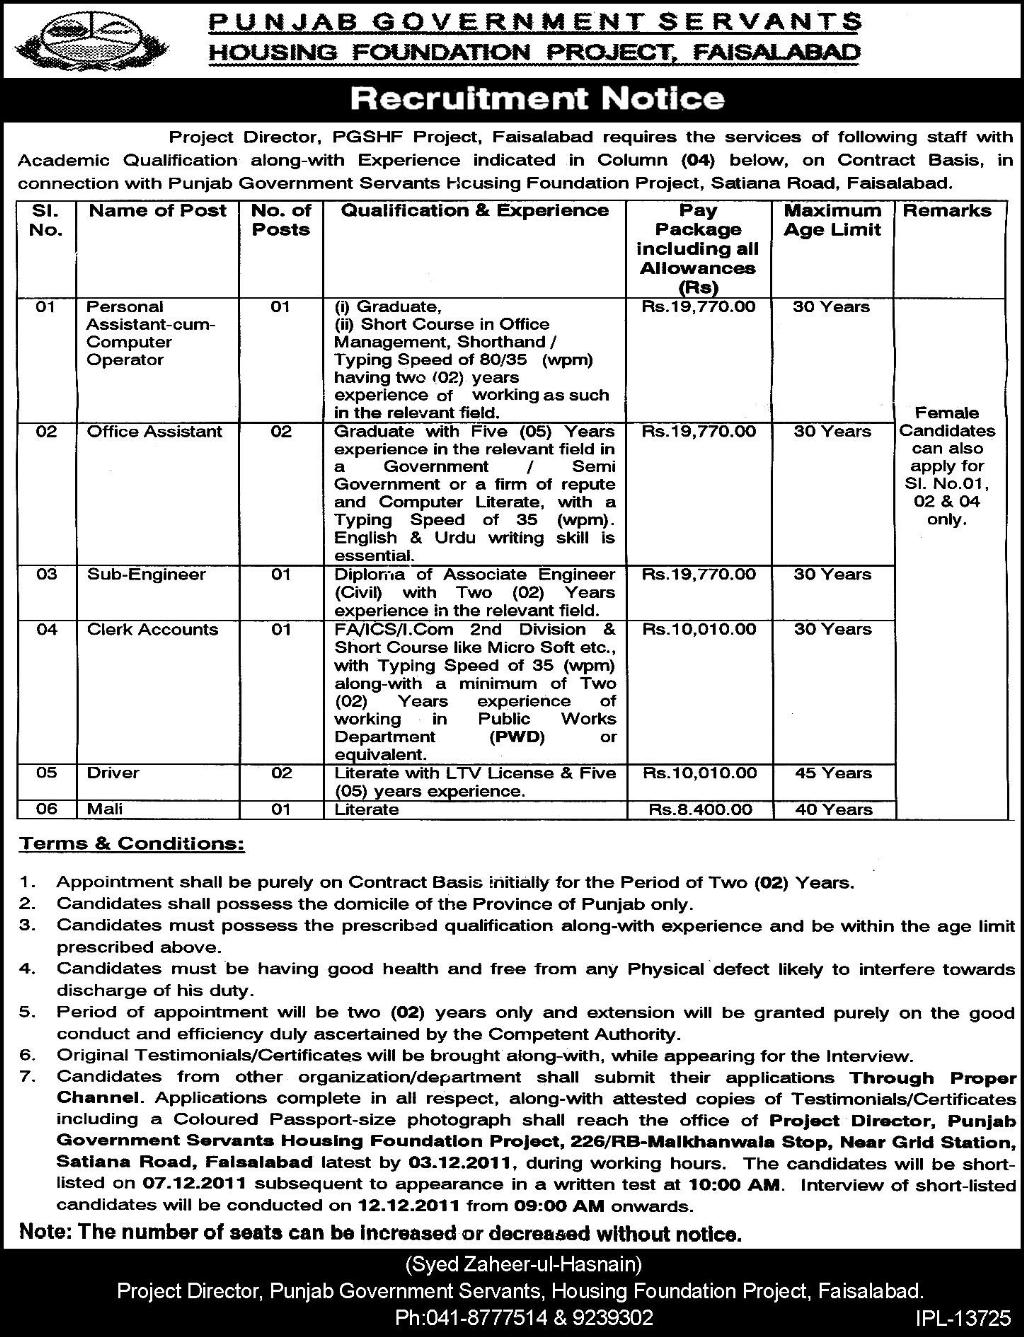 Punjab Government Servants, Housing Foundation Project, Faisalabad Jobs Opportunity